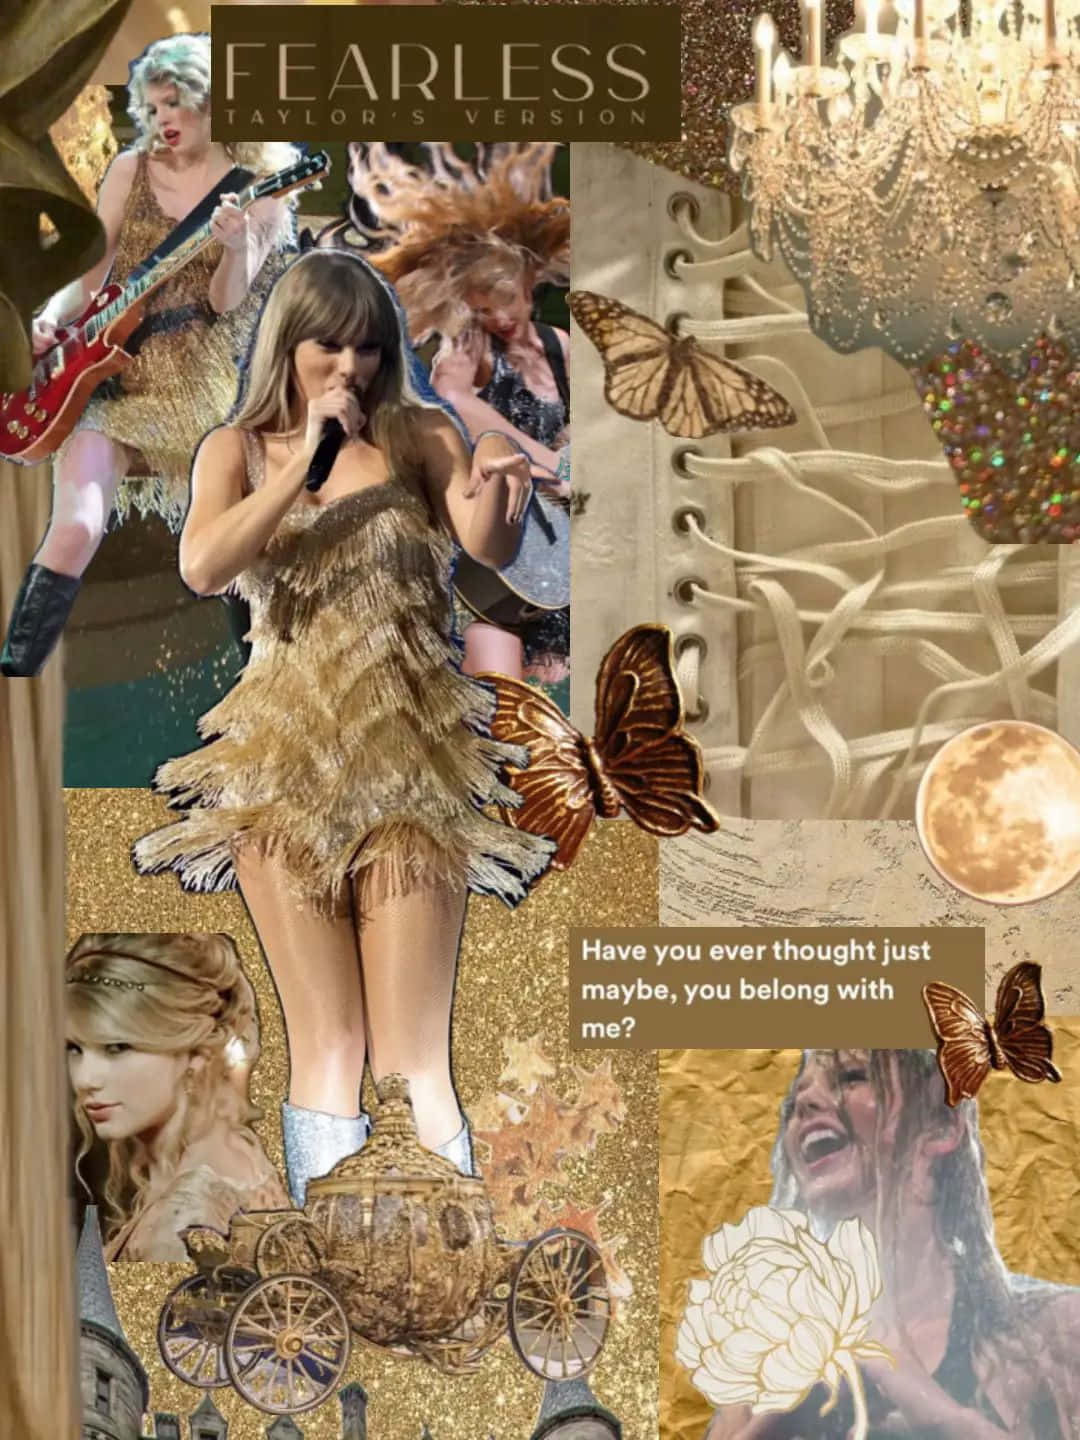 Taylor Swift Fearless Aesthetic Collage.jpg Wallpaper